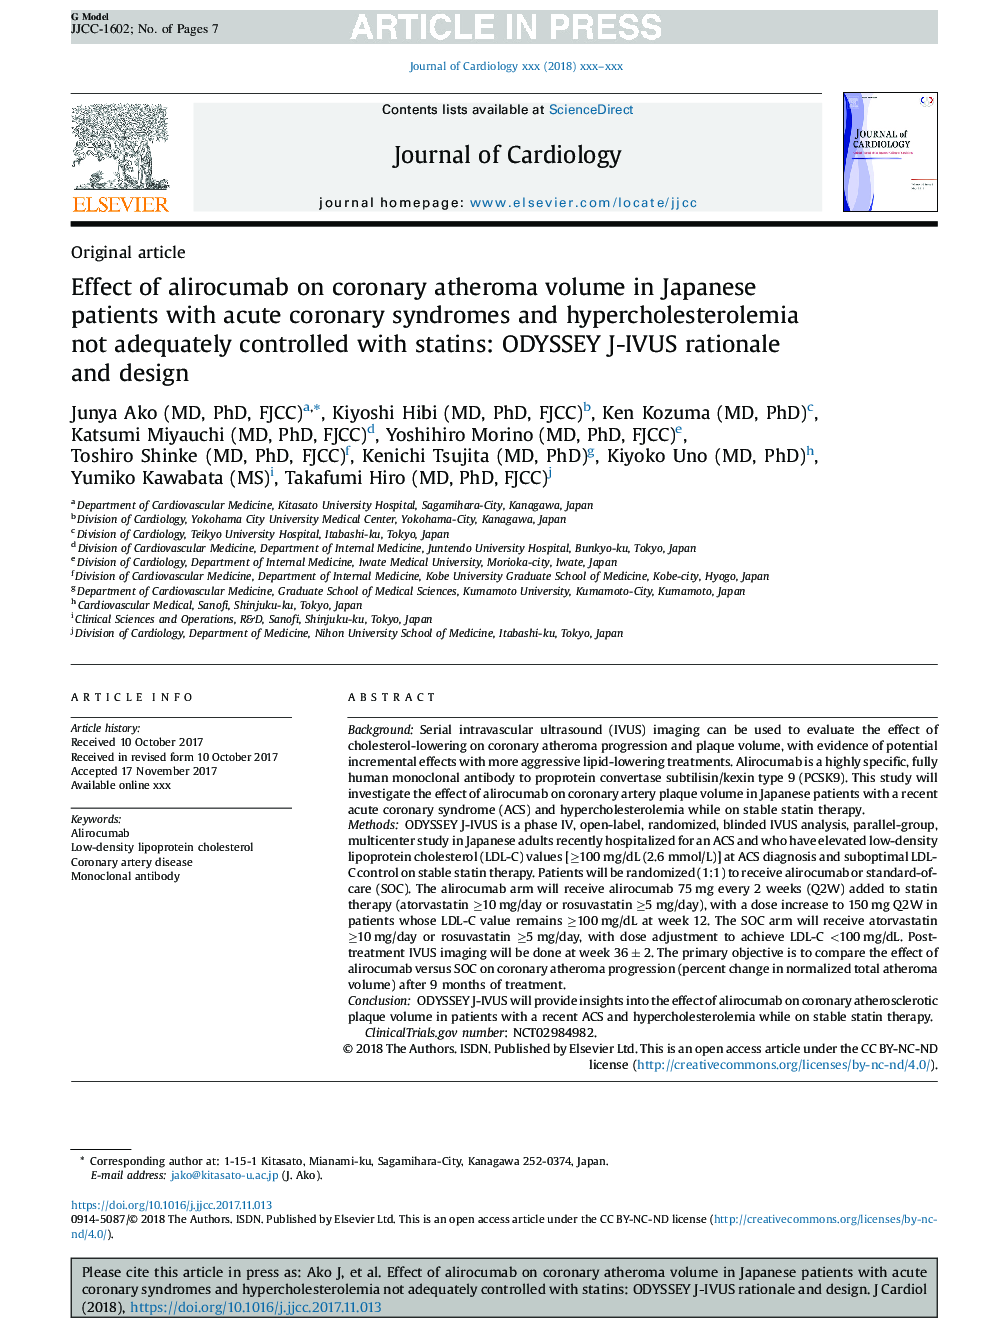 Effect of alirocumab on coronary atheroma volume in Japanese patients with acute coronary syndromes and hypercholesterolemia not adequately controlled with statins: ODYSSEY J-IVUS rationale and design